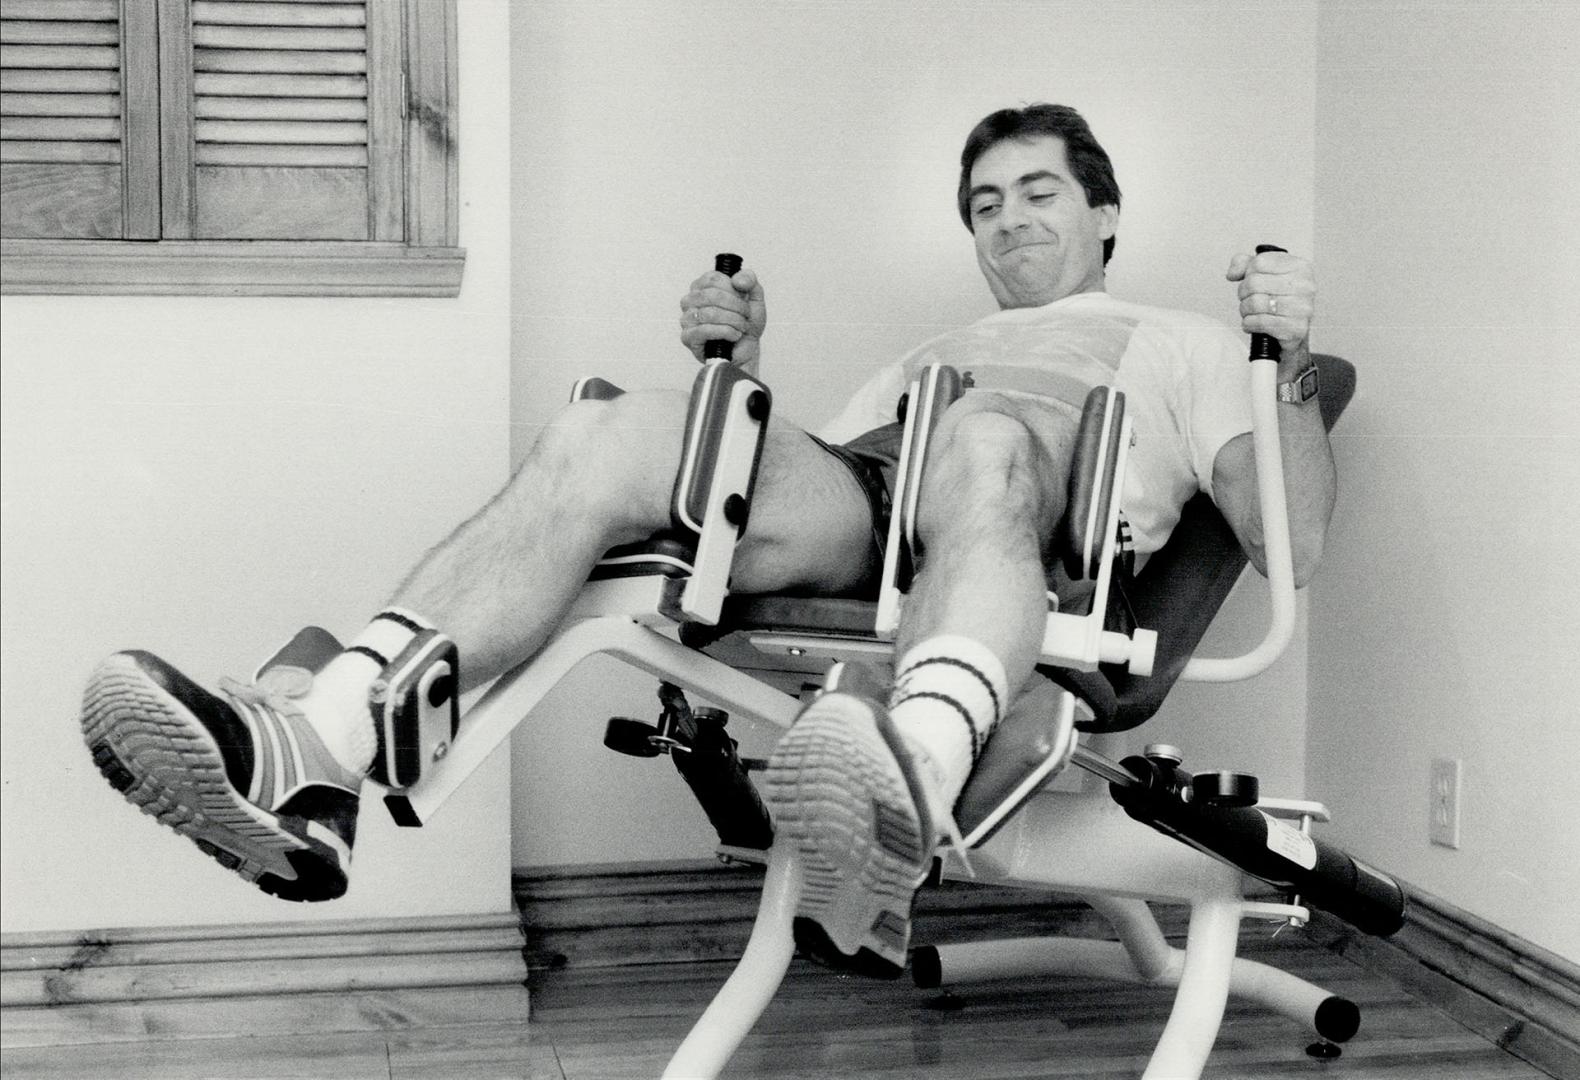 At work and play: Boucher has an elaborate private gym set up in the basement of his home at Lorraine, just north of Montreal